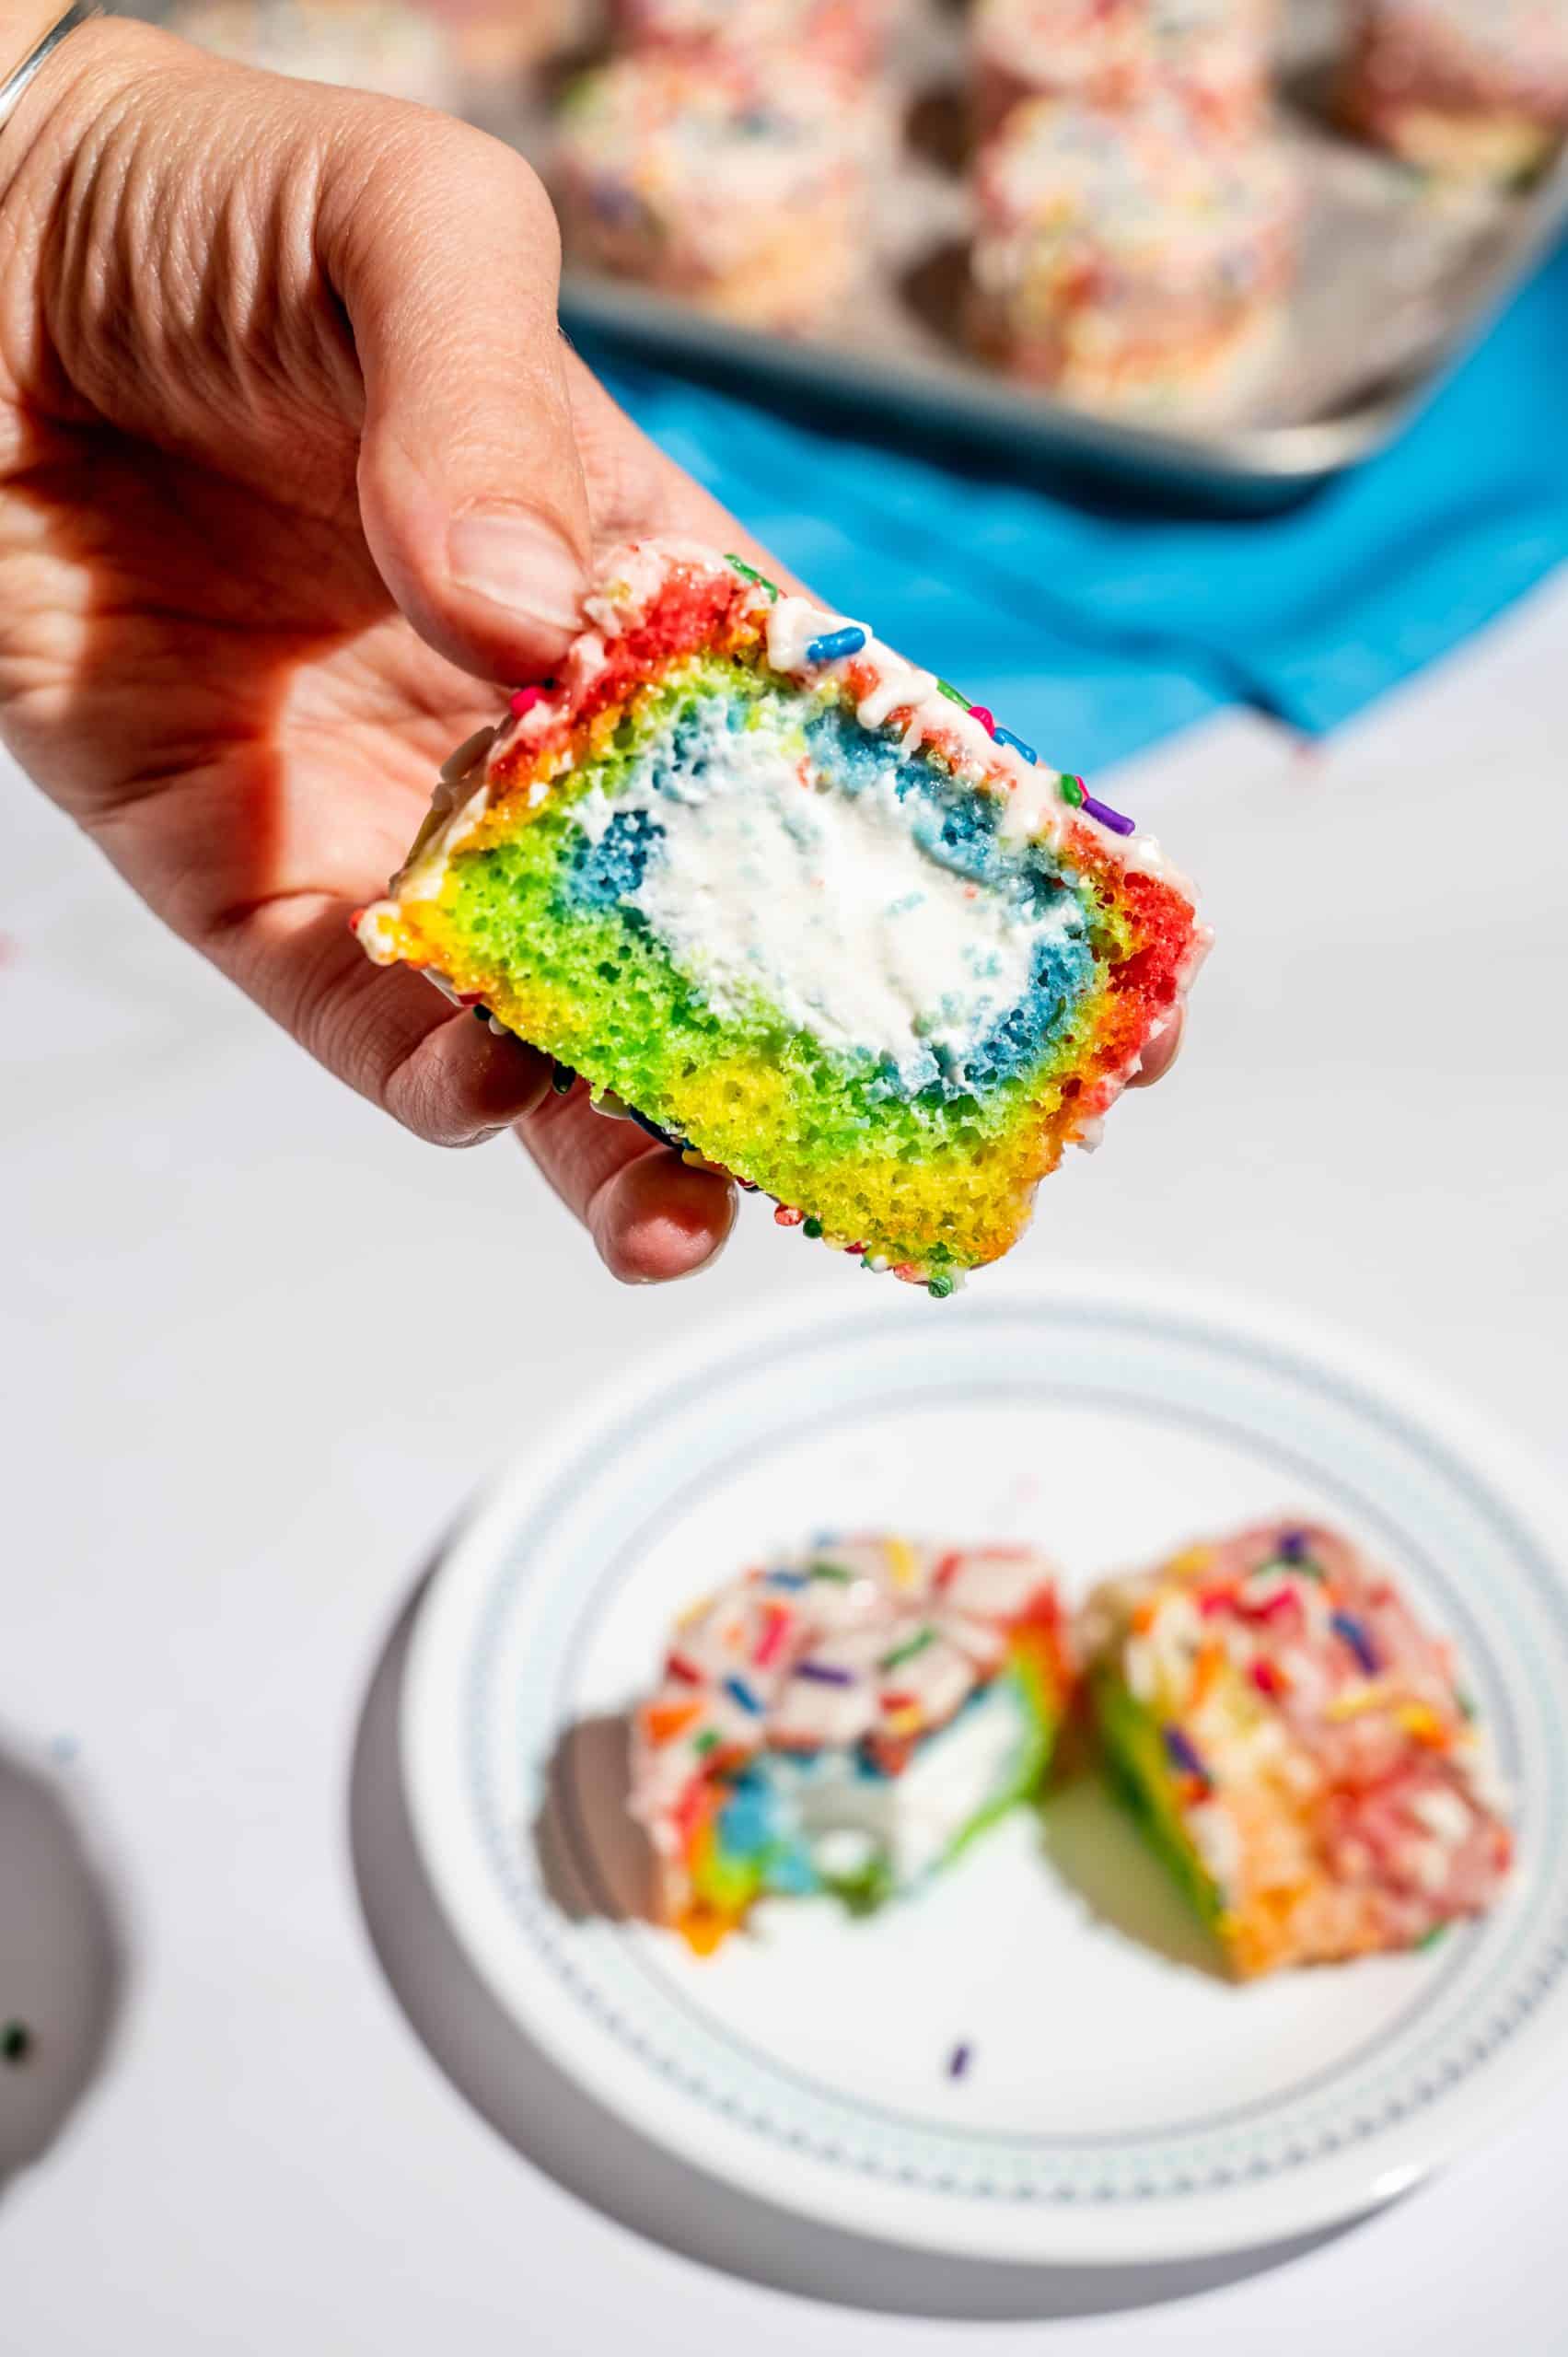 hand holding half of a rainbow vanilla ding dong to show the whipped cream filling inside